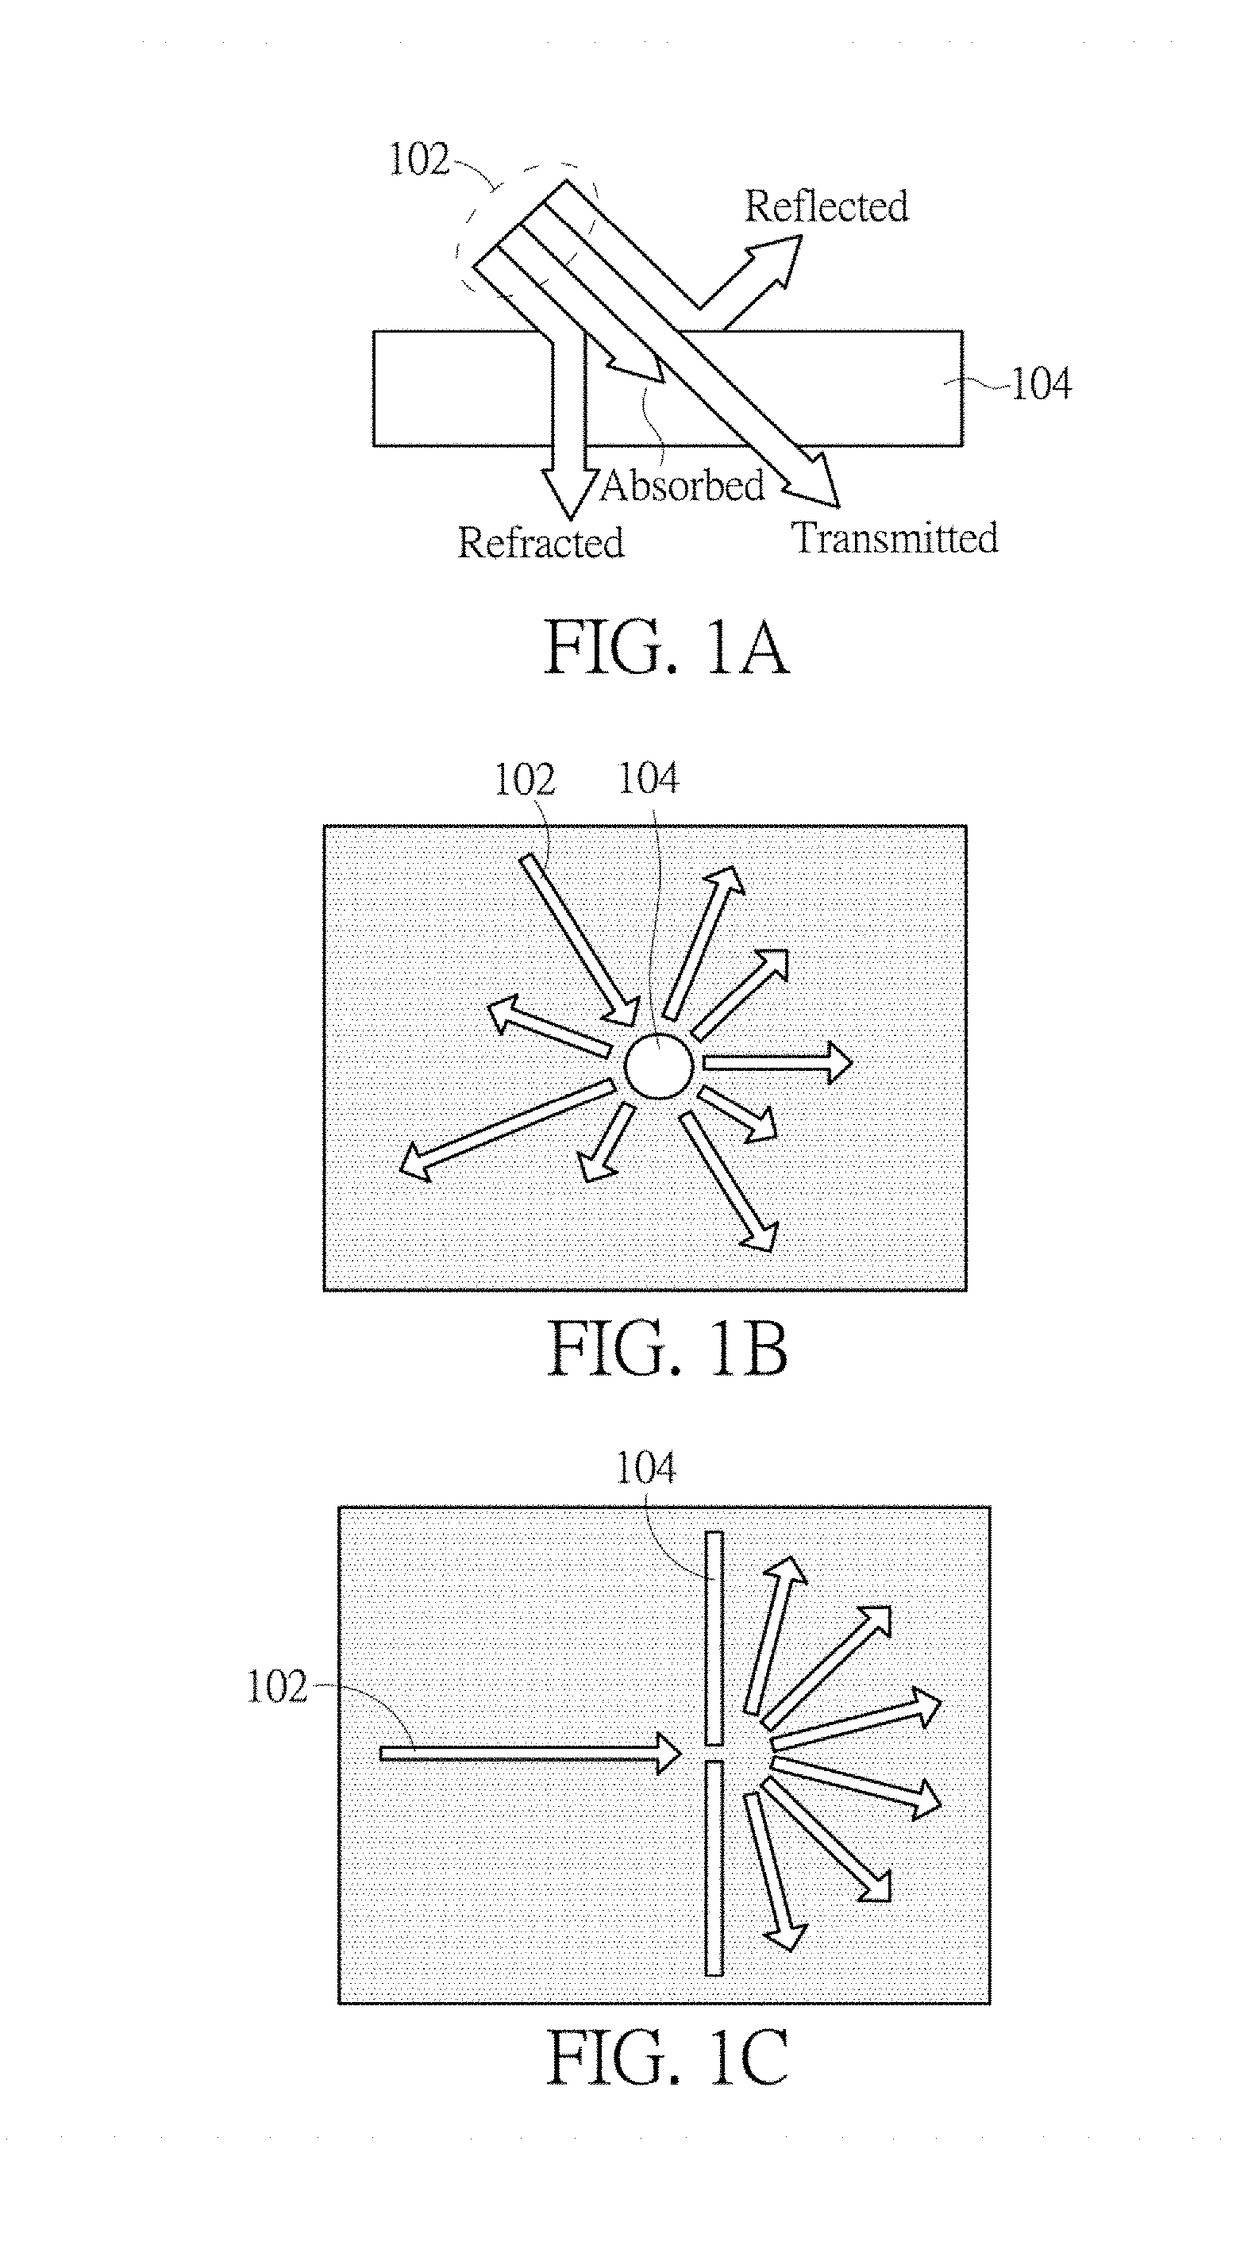 Non-contact angle measuring apparatus, mission critical inspection apparatus, non-invasive diagnosis/treatment apparatus, method for filtering matter wave from a composite particle beam, non-invasive measuring apparatus, apparatus for generating a virtual space-time lattice, and fine atomic clock